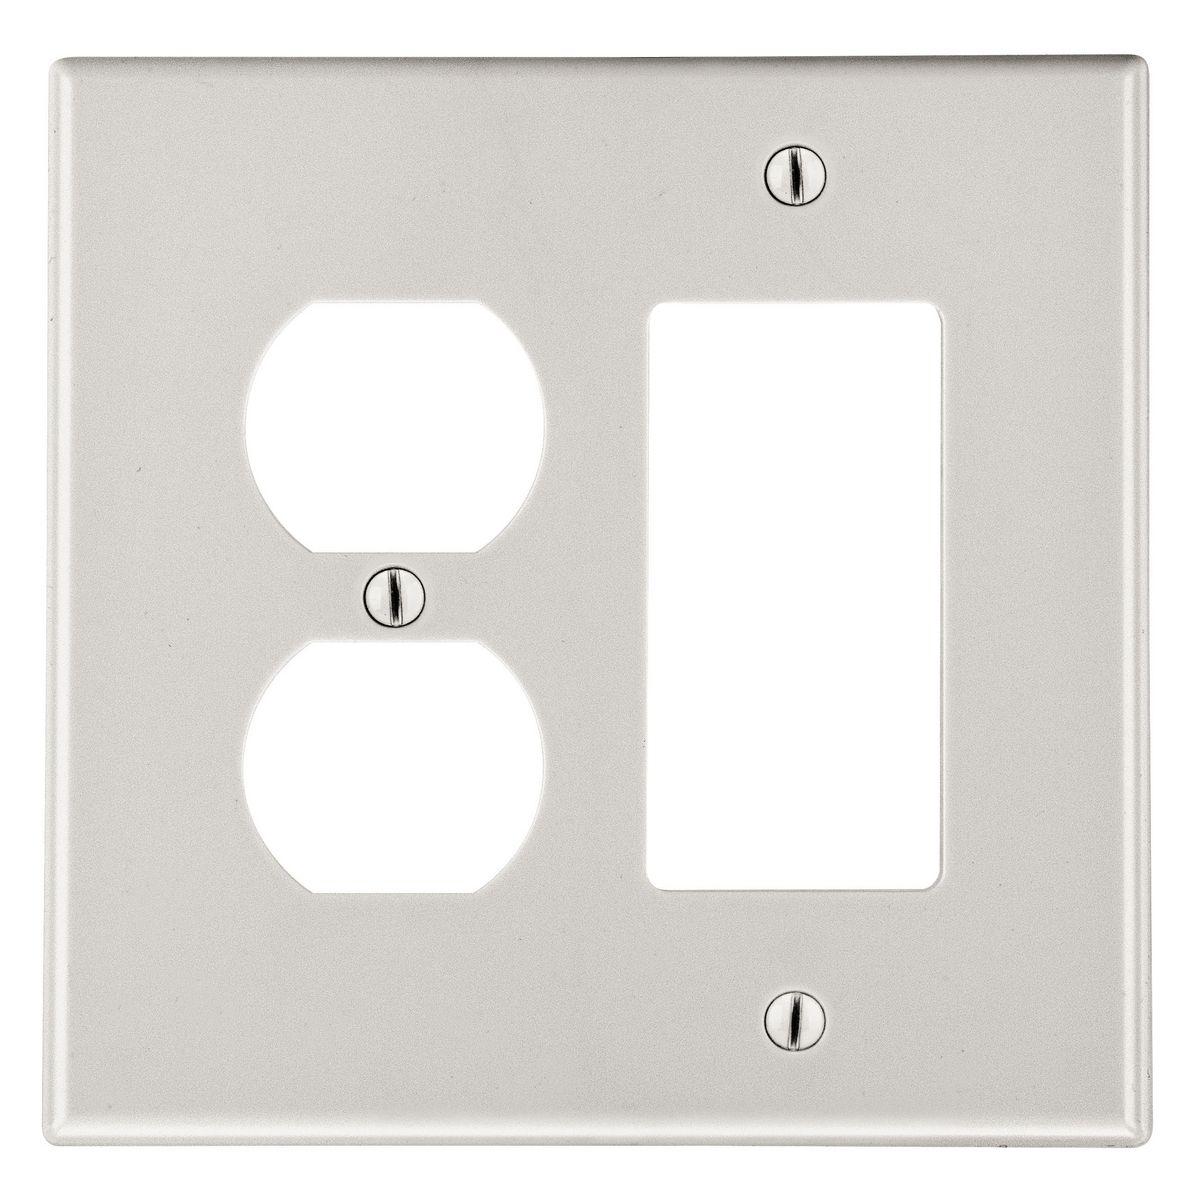 Hubbell P826LA Wallplate, 2-Gang,  1) Duplex 1) Decorator, Light Almond  ; High-impact, self-extinguishing polycarbonate material ; More Rigid ; Sharp lines and less dimpling ; Smooth satin finish ; Blends into wall with an optimum finish ; Smooth Satin Finish